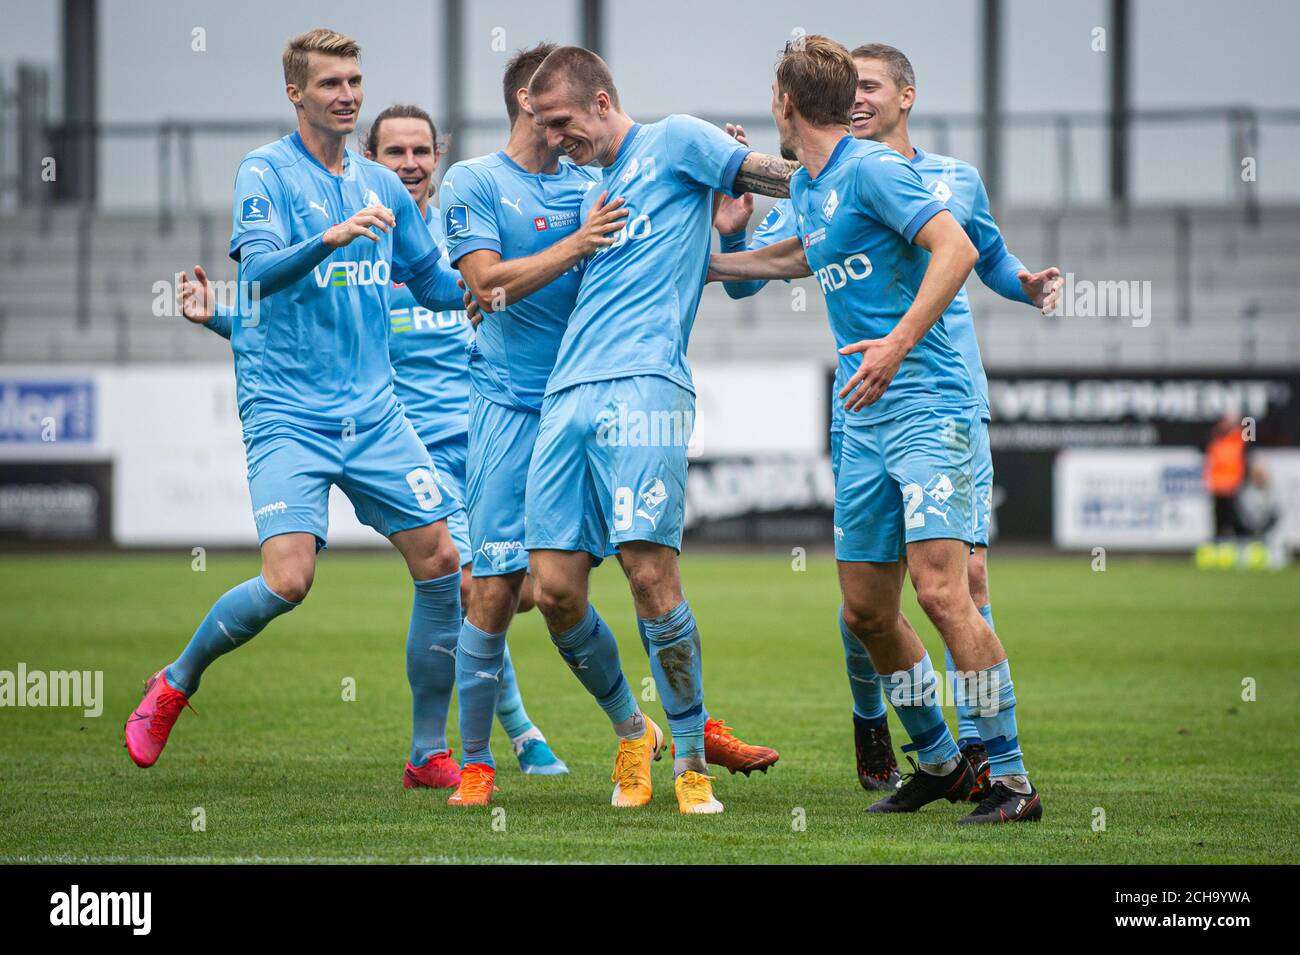 Horsens, Denmark. 13th Sep, 2020. Emil Riis Jakobsen (9) of Randers FC  scores for 0-2 during the 3F Superliga match between AC Horsens and Randers  FC at Casa Arena in Horsens. (Photo